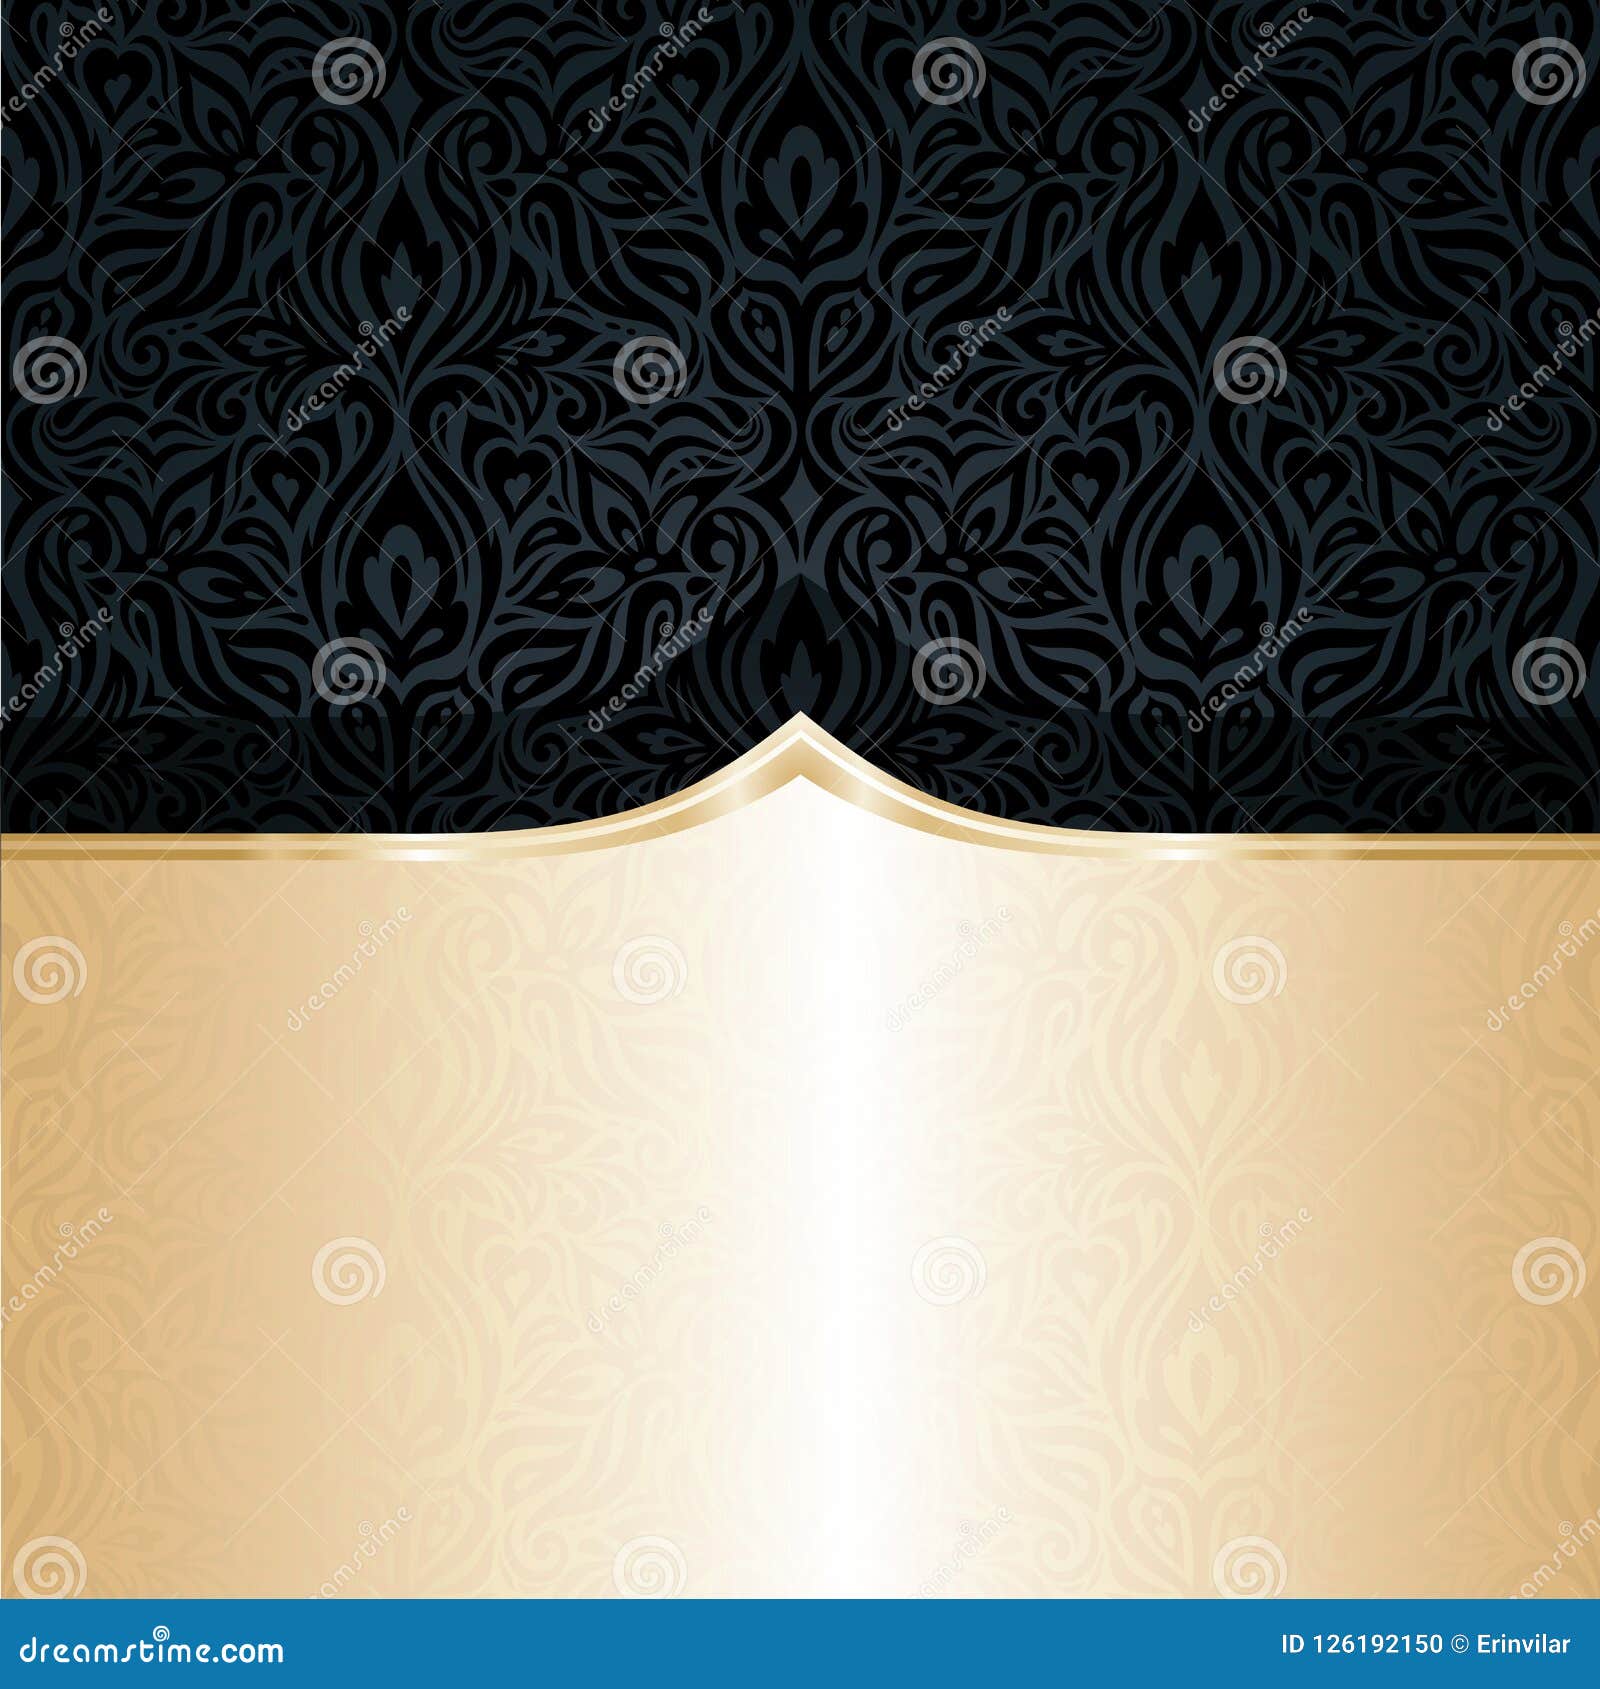 SV COLLECTIONS Wallpaper Black Gold Damask 400  45cm  18 sqft Approx  Royal Looking SELF Adhesive Wallpaper for Bedroom Living Room Office  Restaurant Peel and Stick Wallpaper Furniture  Amazonin Home Improvement